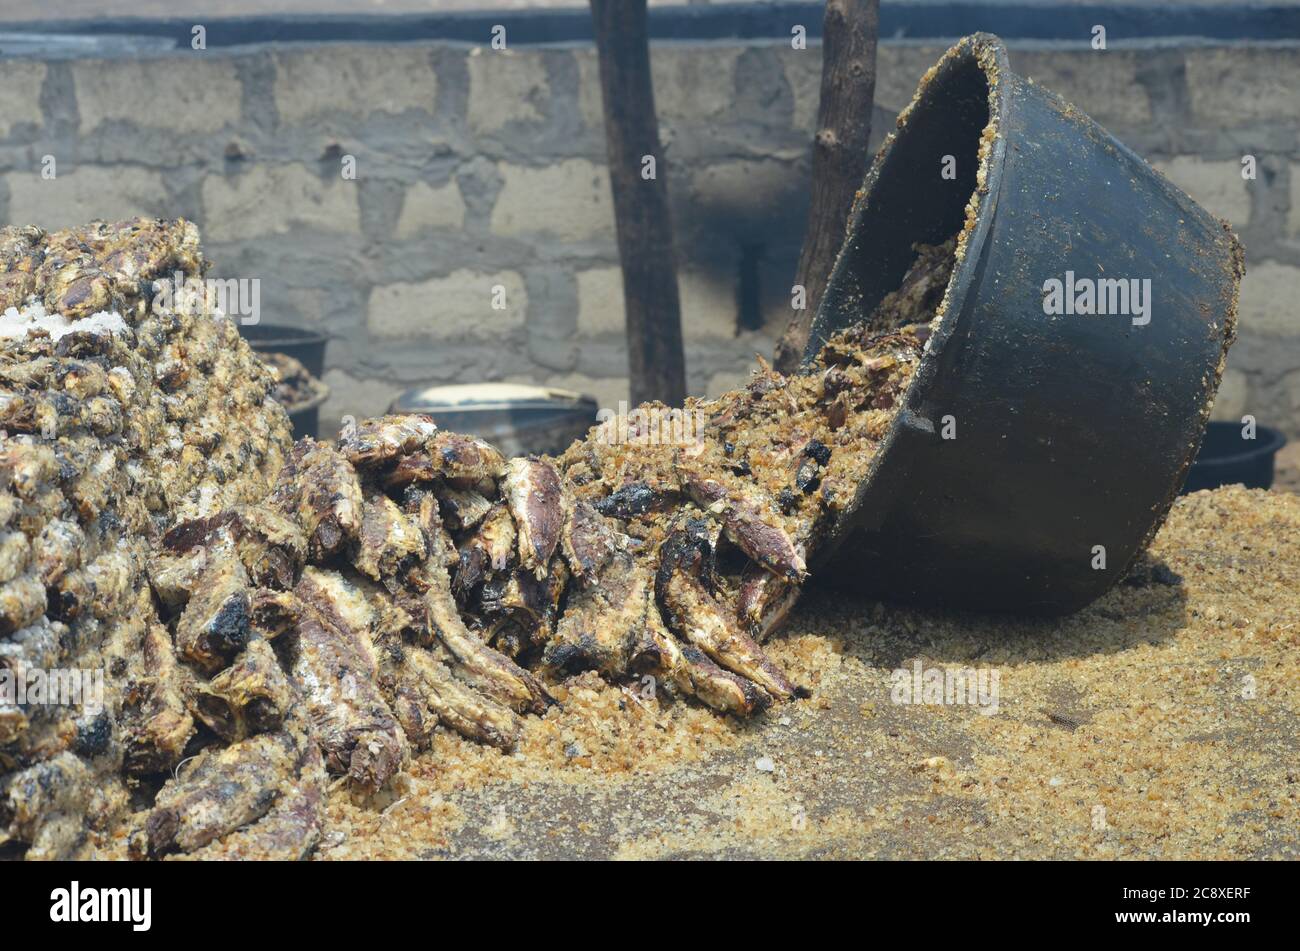 Traditionally braised & salted fish in Mballing, Senegal Stock Photo